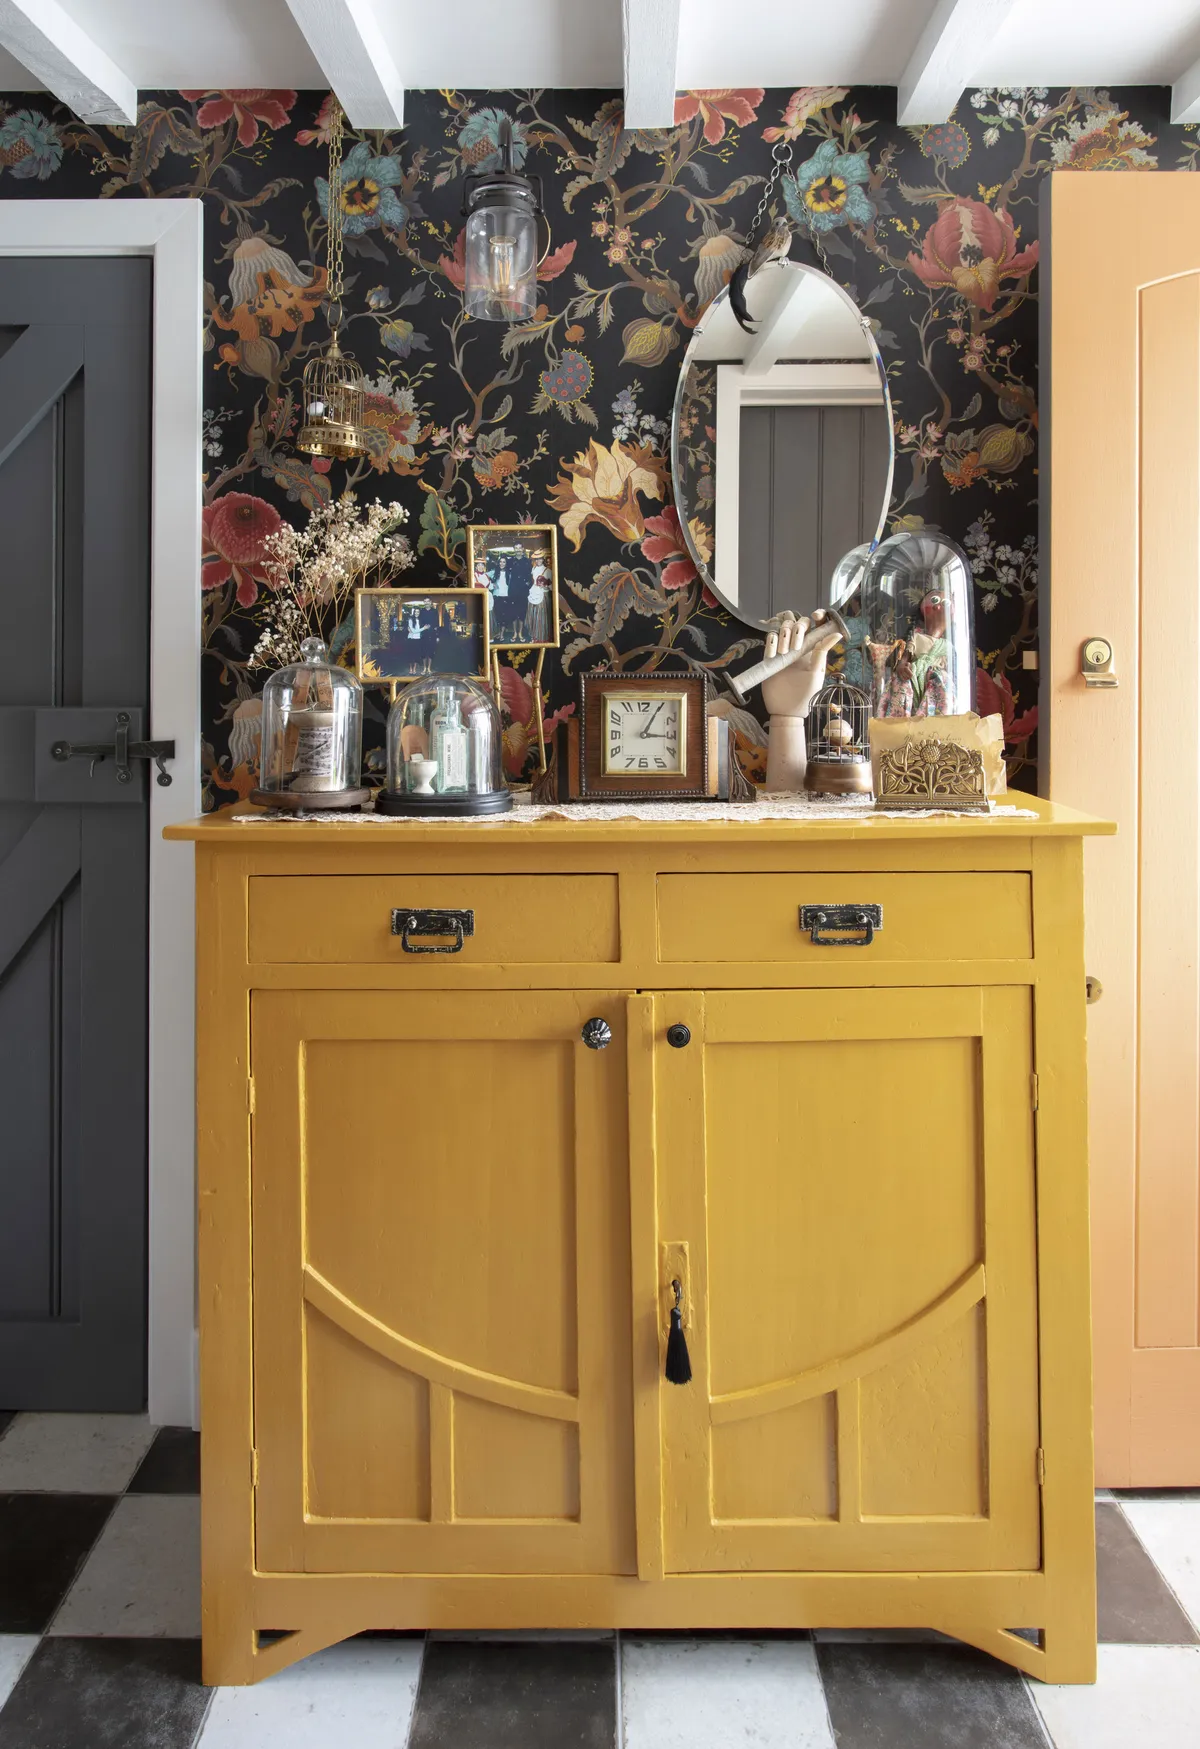 A vintage sideboard from an antiques fair has been renovated and painted a vibrant yellow hue picked out from the wallpaper, to provide a focal point and storage